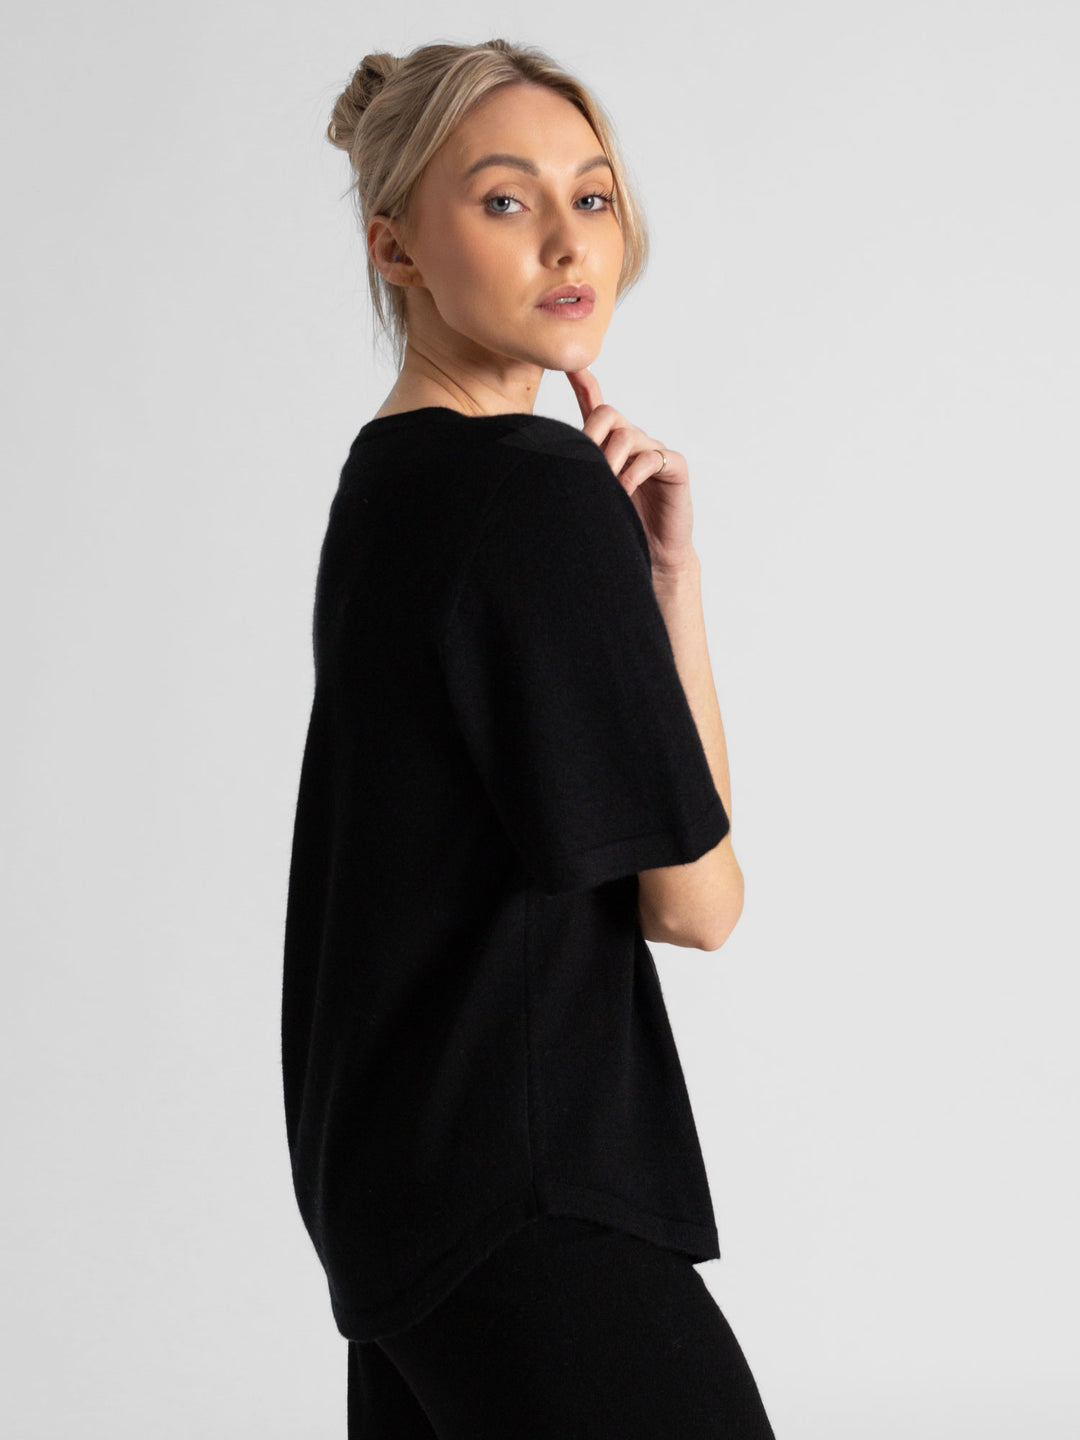 Cashmere t-shirt "Airy" in 100% pure cashmere. Color: Black. Scandinavian design by Kashmina.